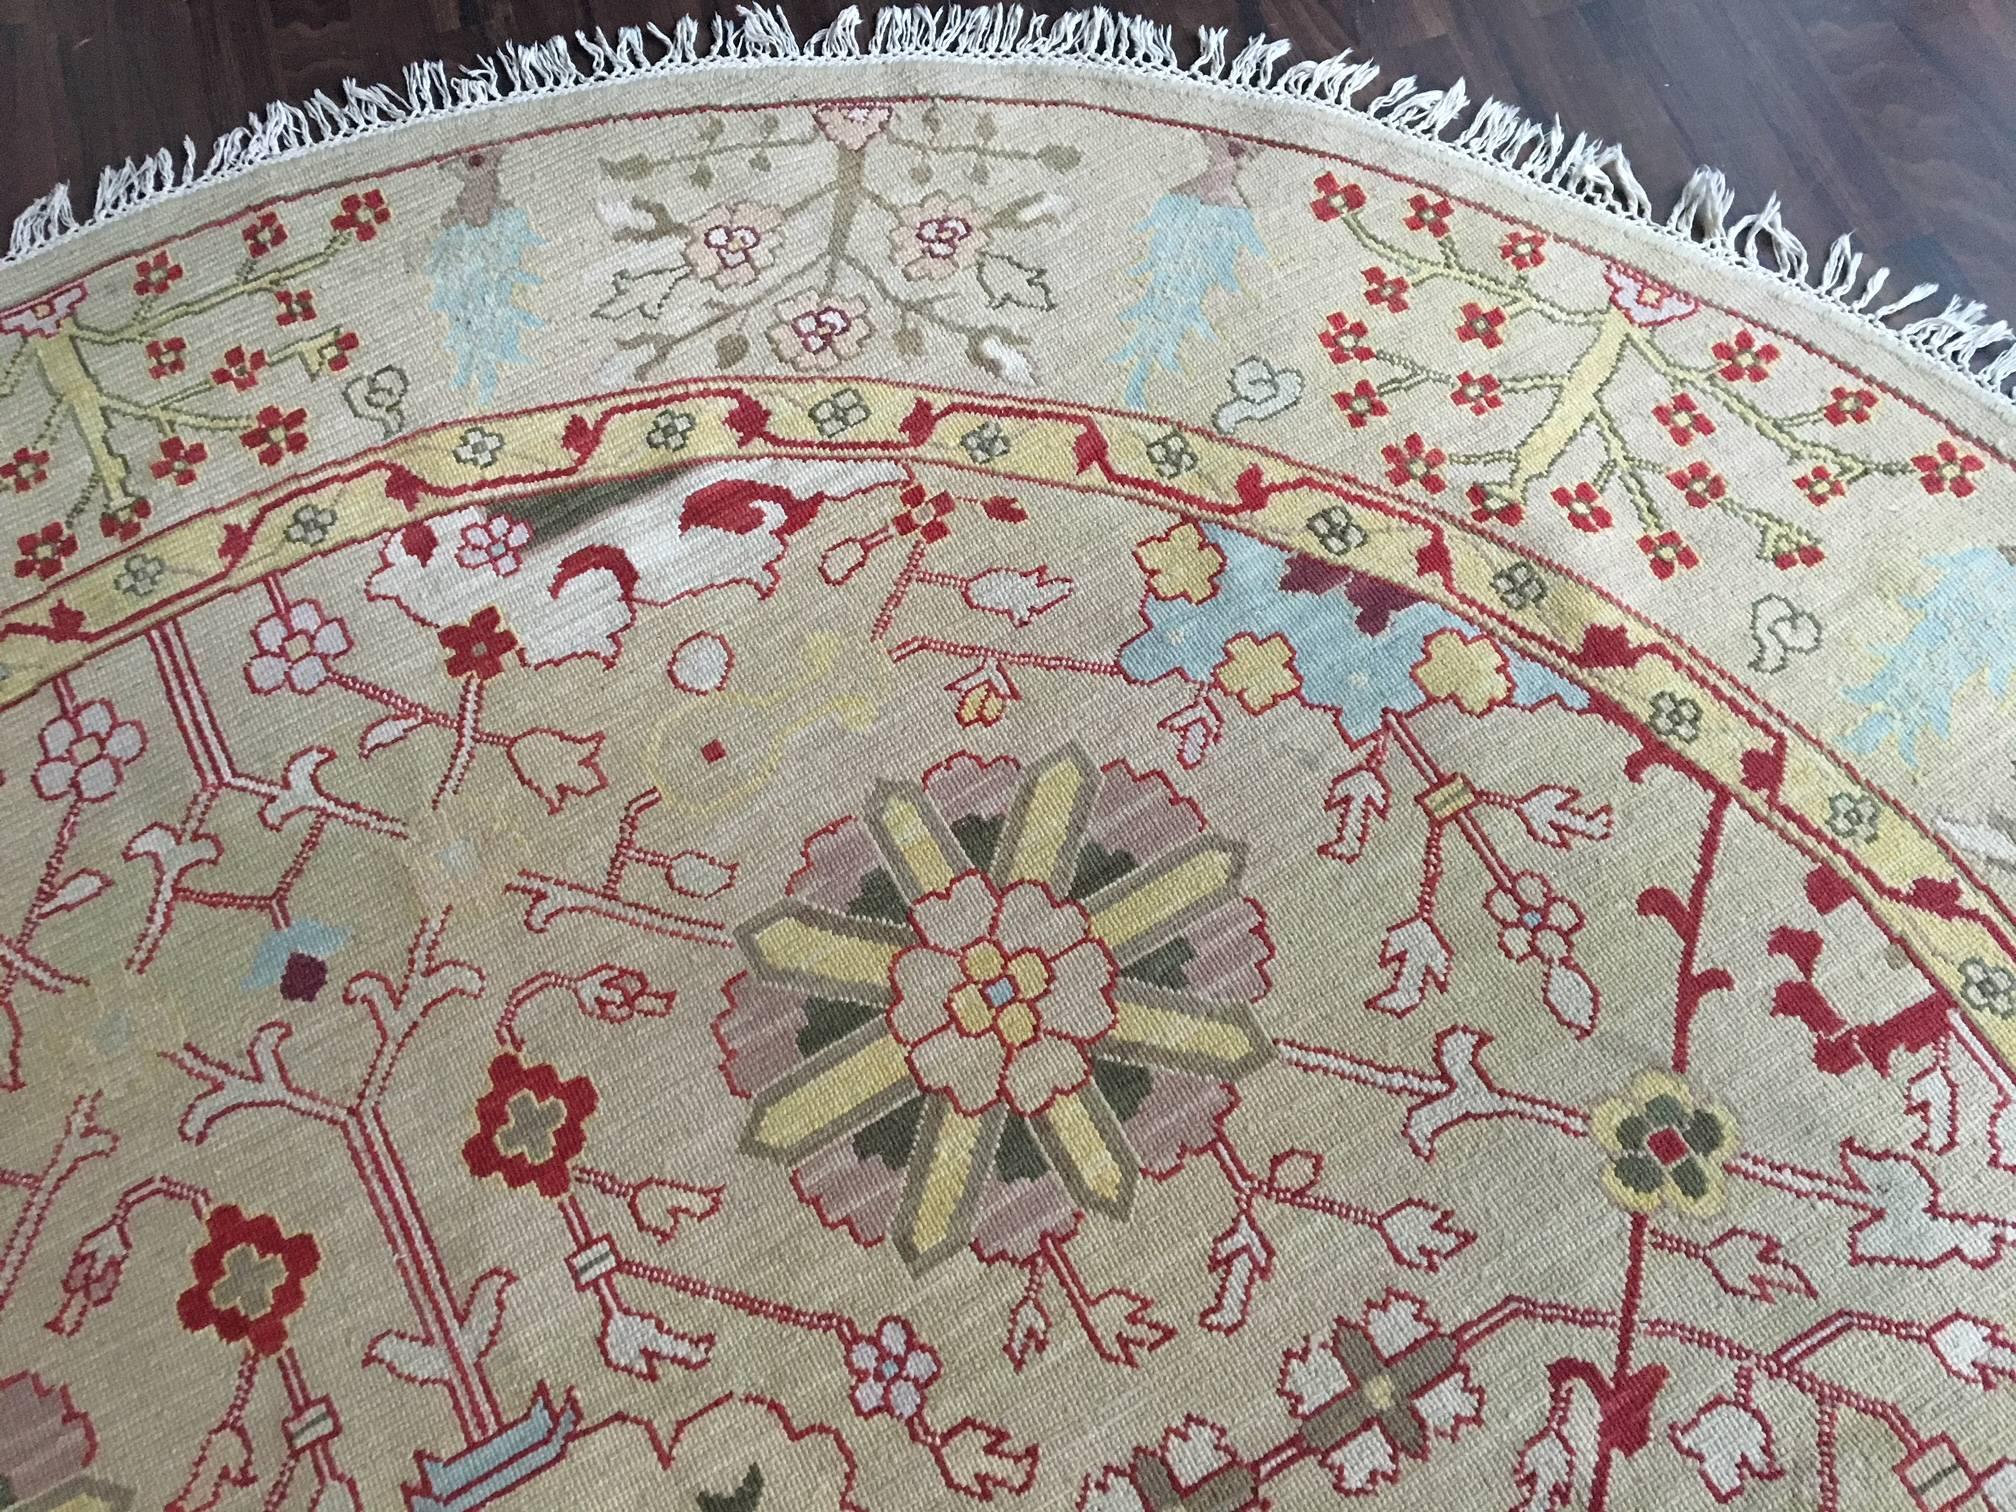 Large 8-foot round rug by Nourmak is 100% wool and handmade. Excellent condition with no stains or odors.

As always, all reasonable offers will be considered.